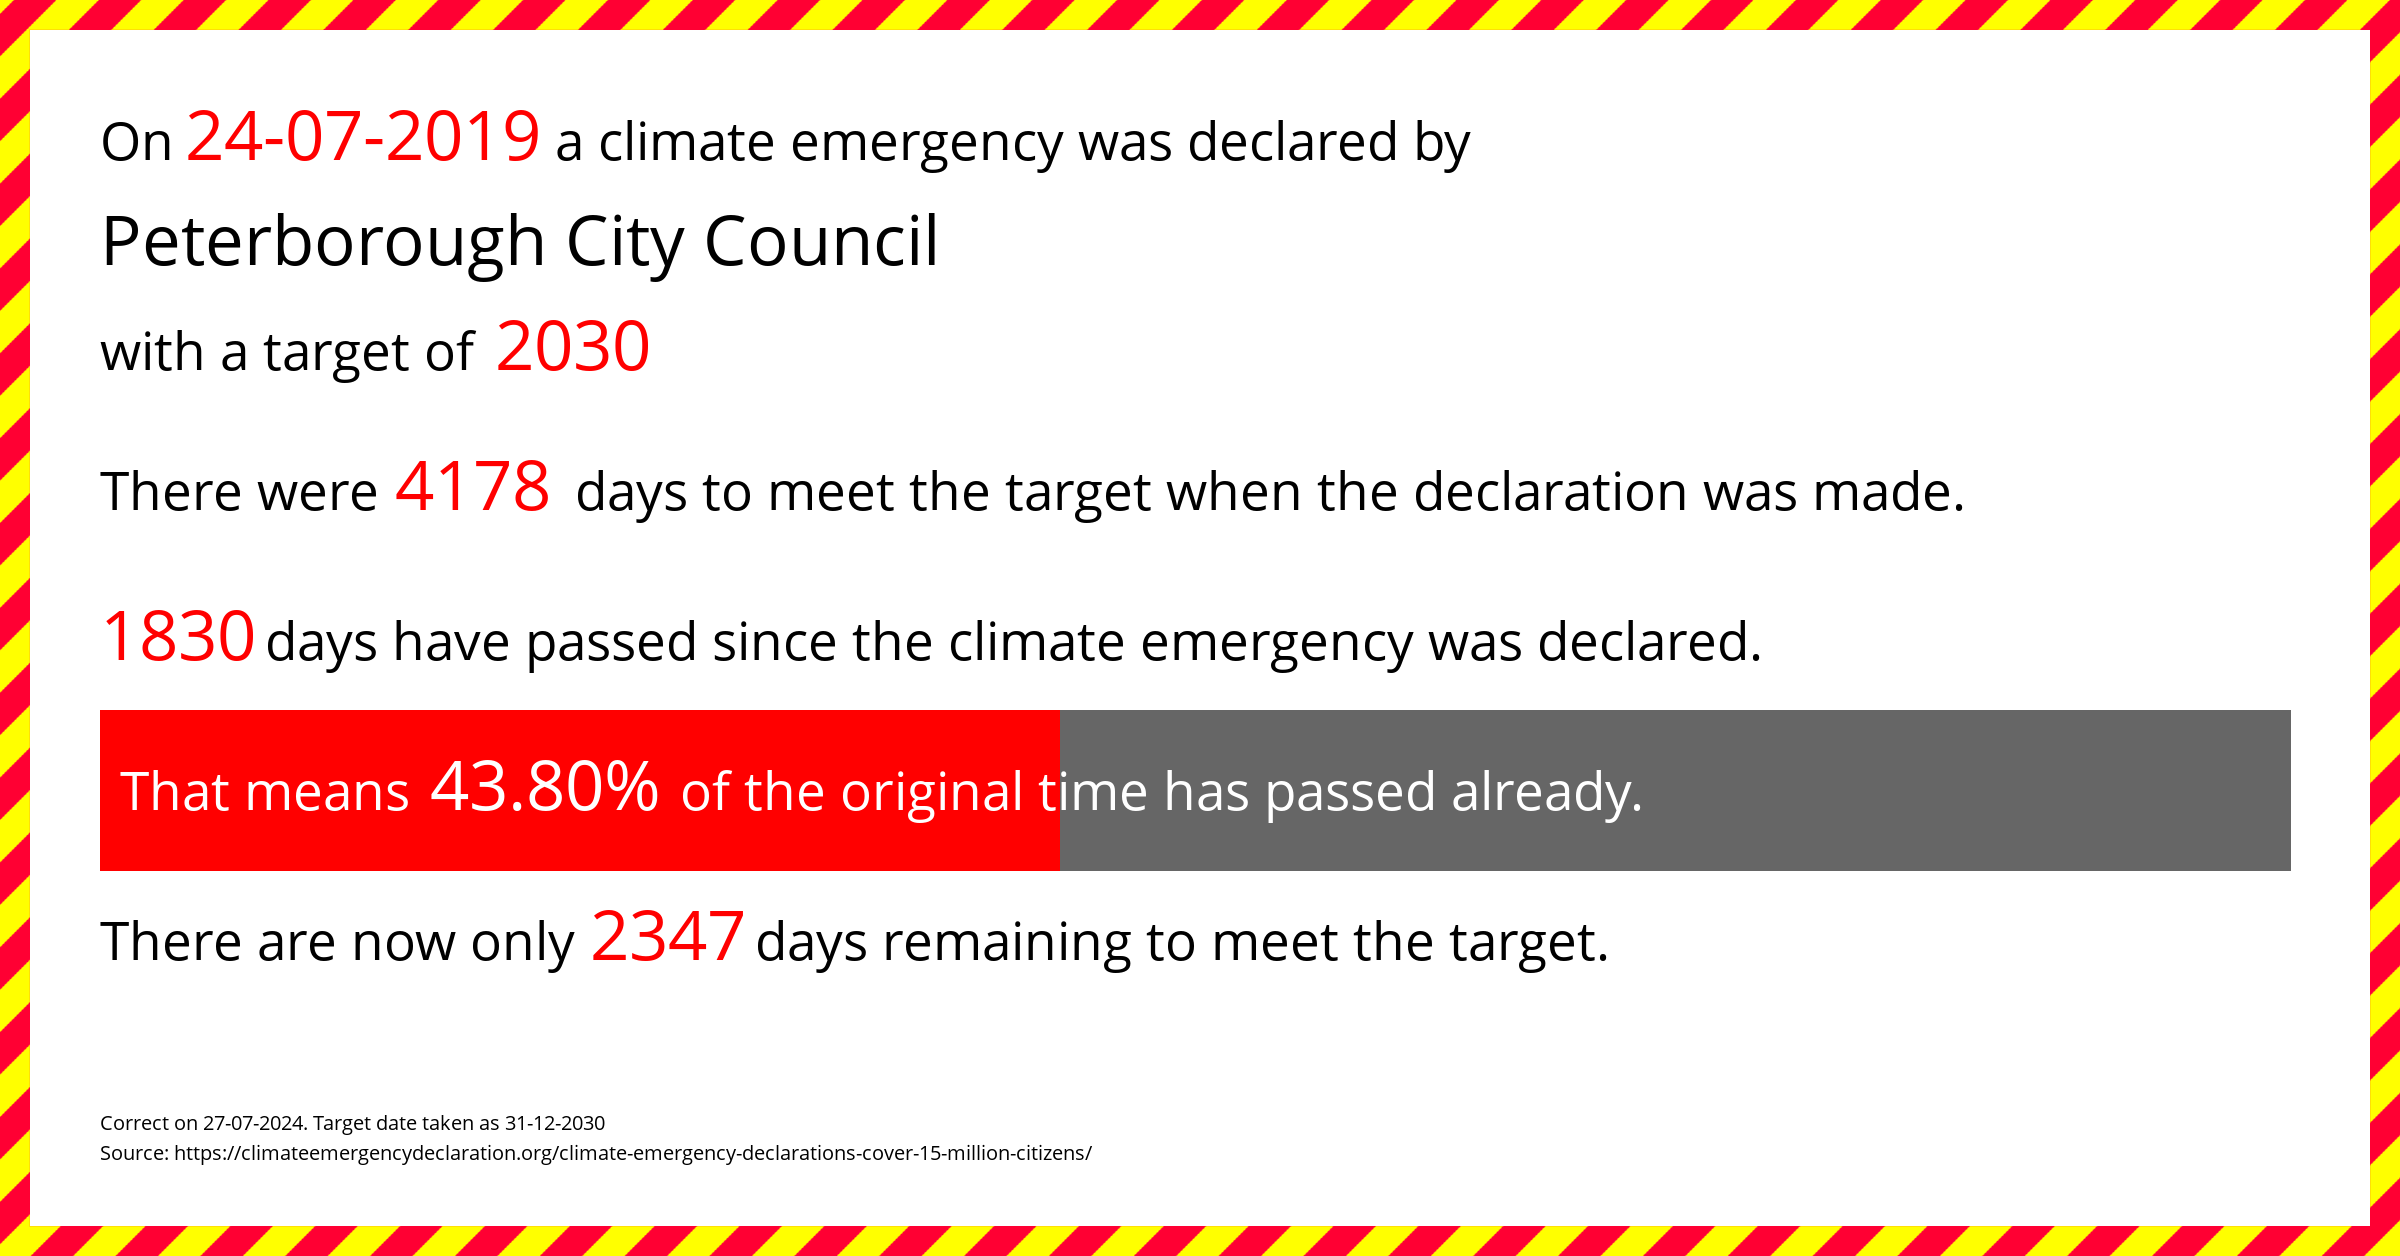 Peterborough City Council declared a Climate emergency on Wednesday 24th July 2019, with a target of 2030.